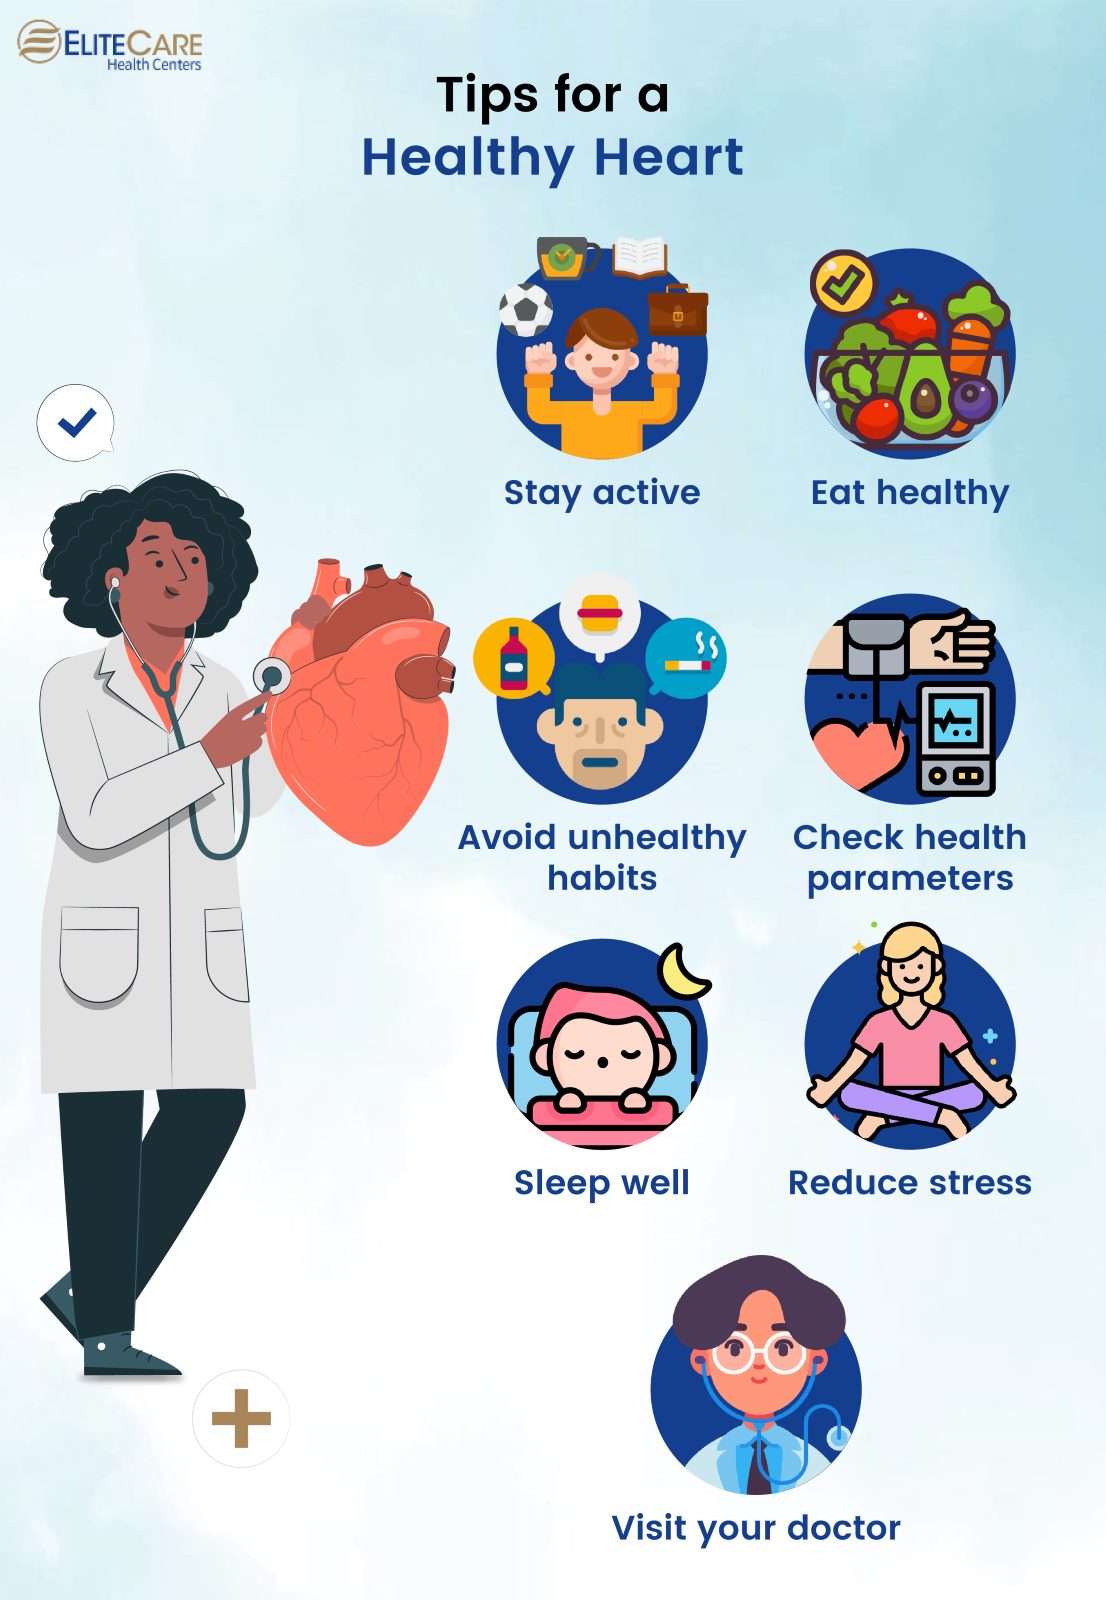 Tips for Healthy Heart